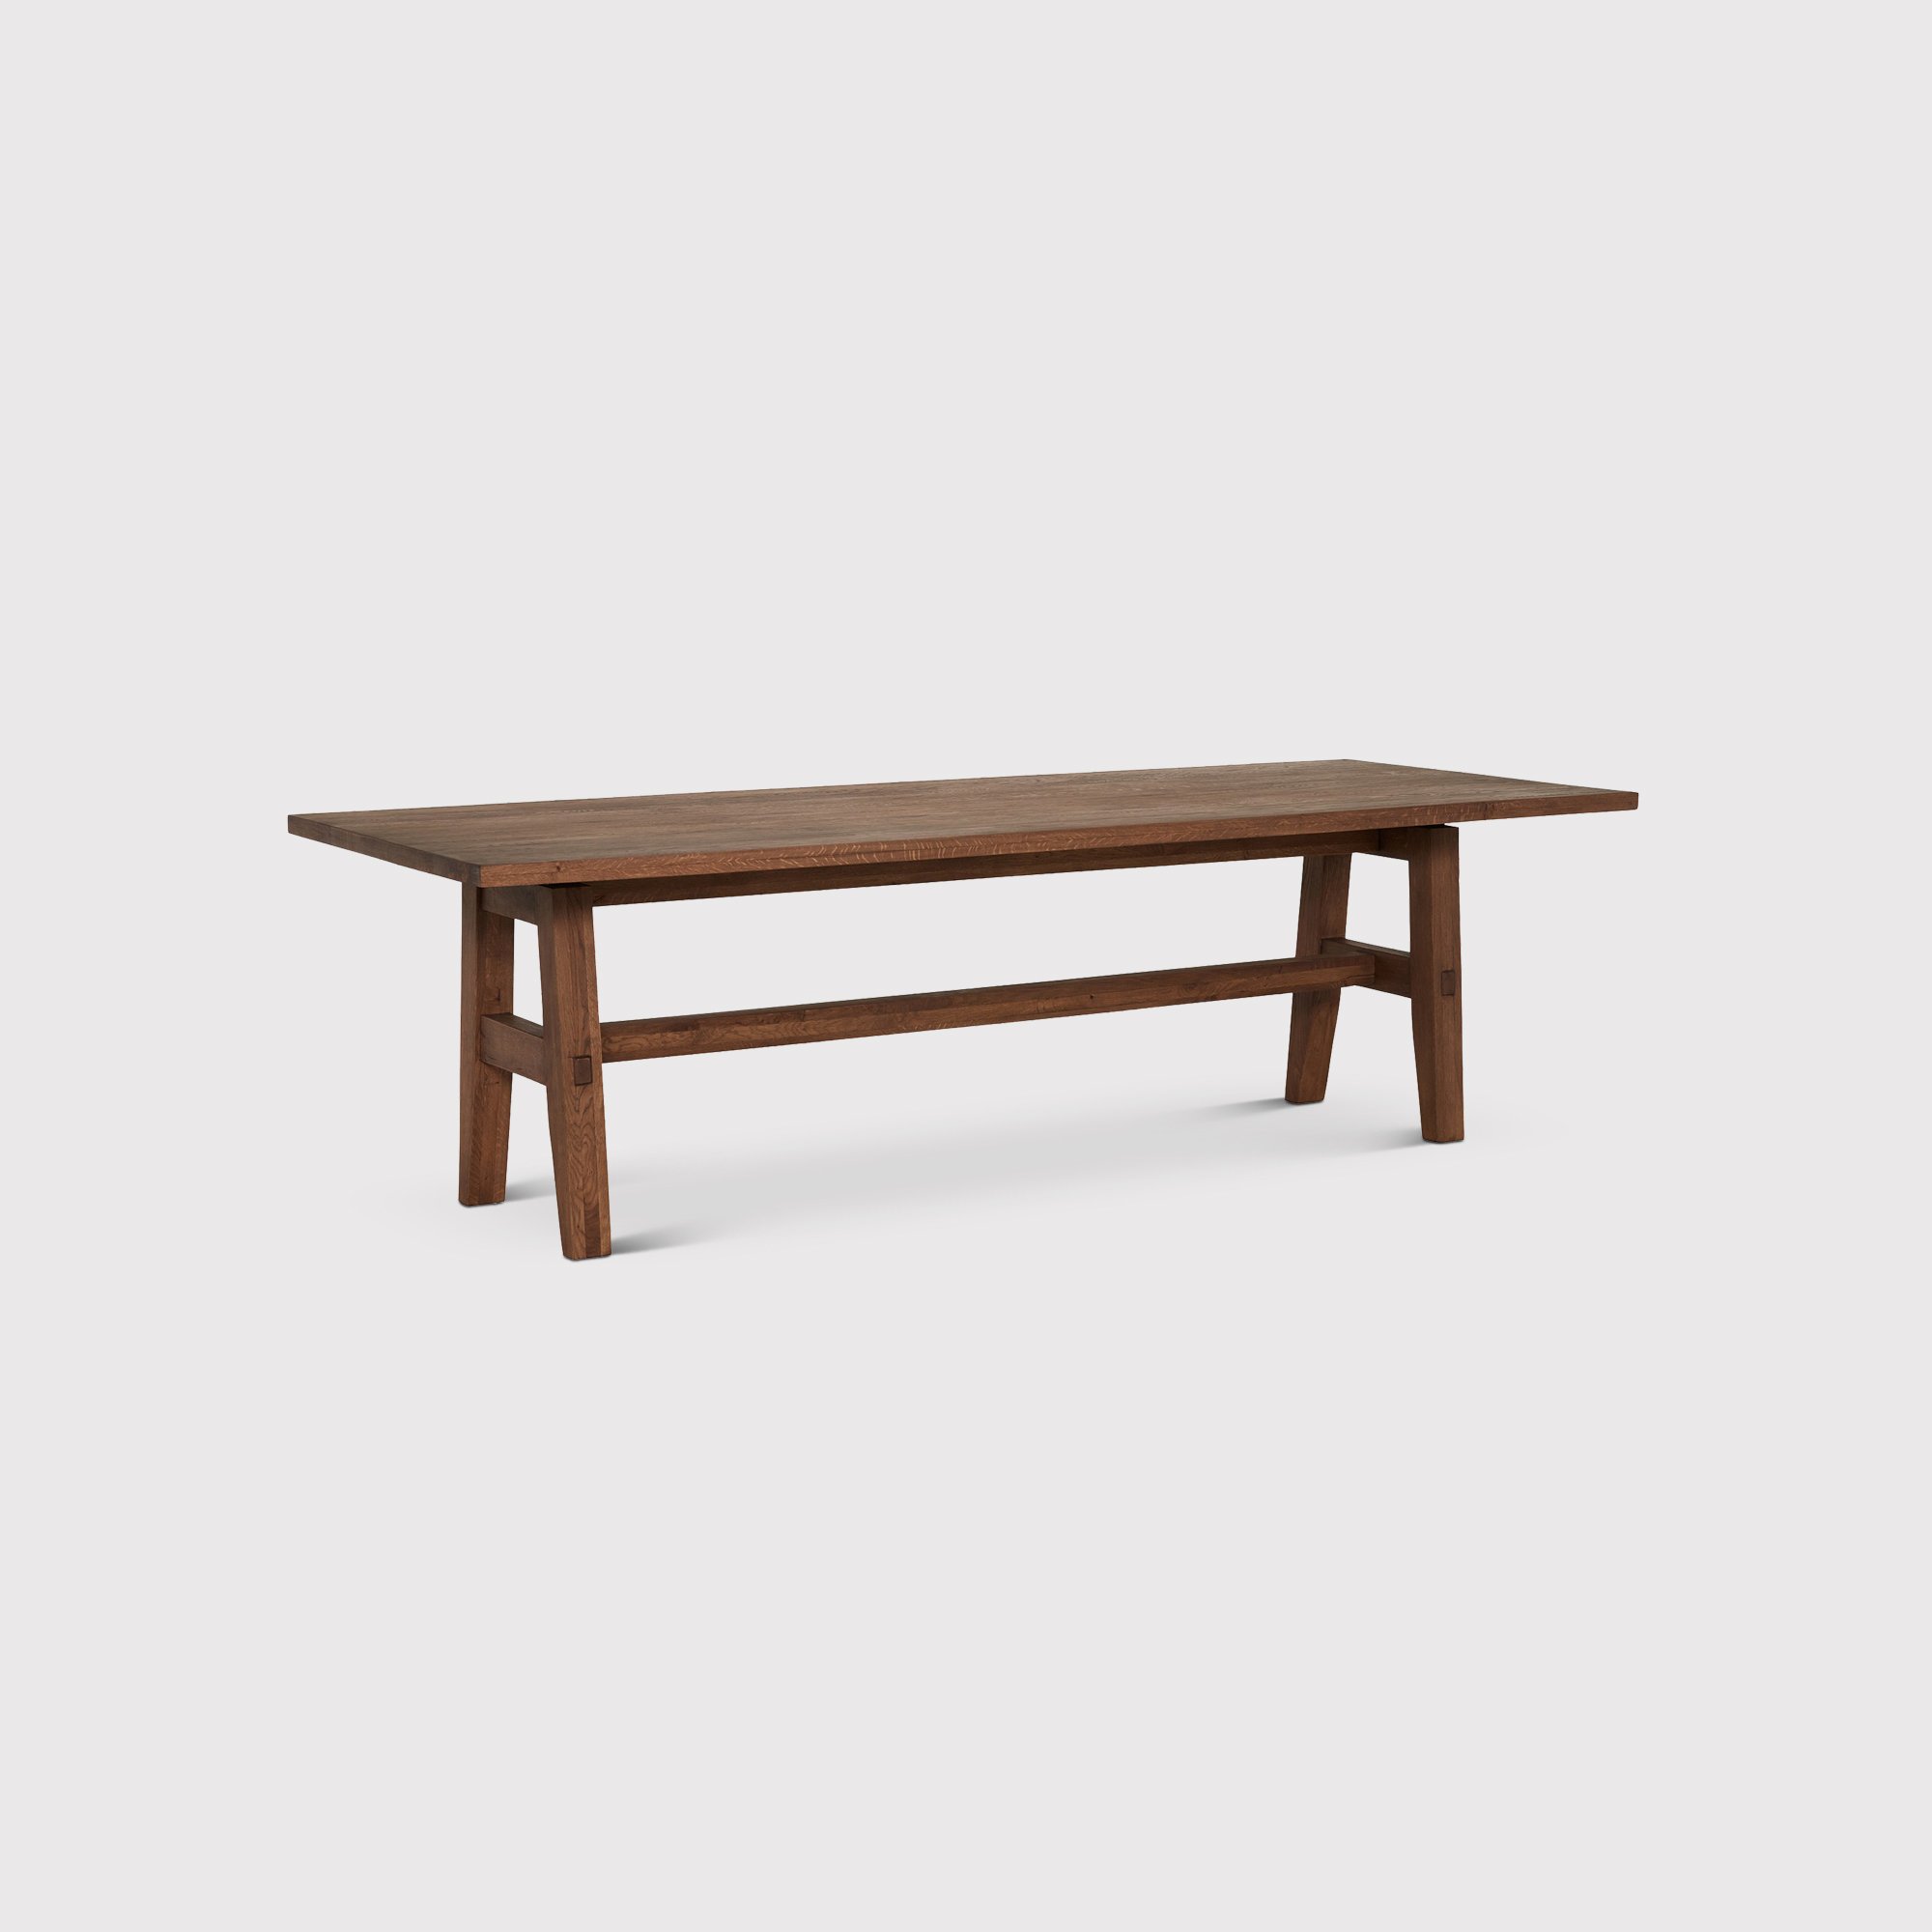 Pure Furniture Wilder Dining Table 220cm, Brown Oak | Barker & Stonehouse